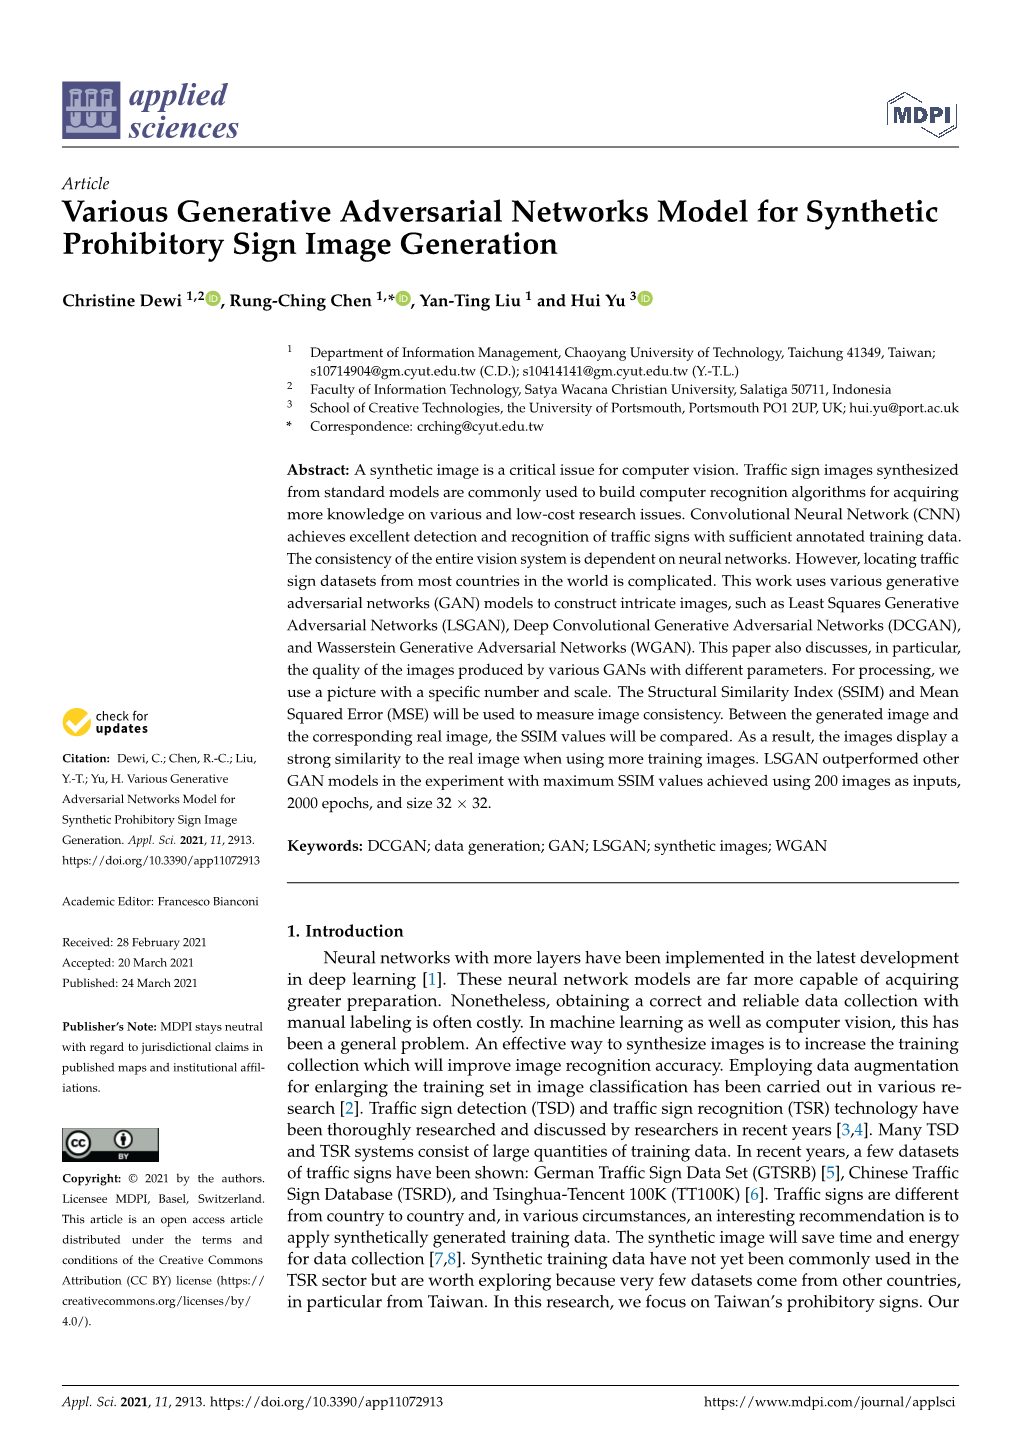 Various Generative Adversarial Networks Model for Synthetic Prohibitory Sign Image Generation